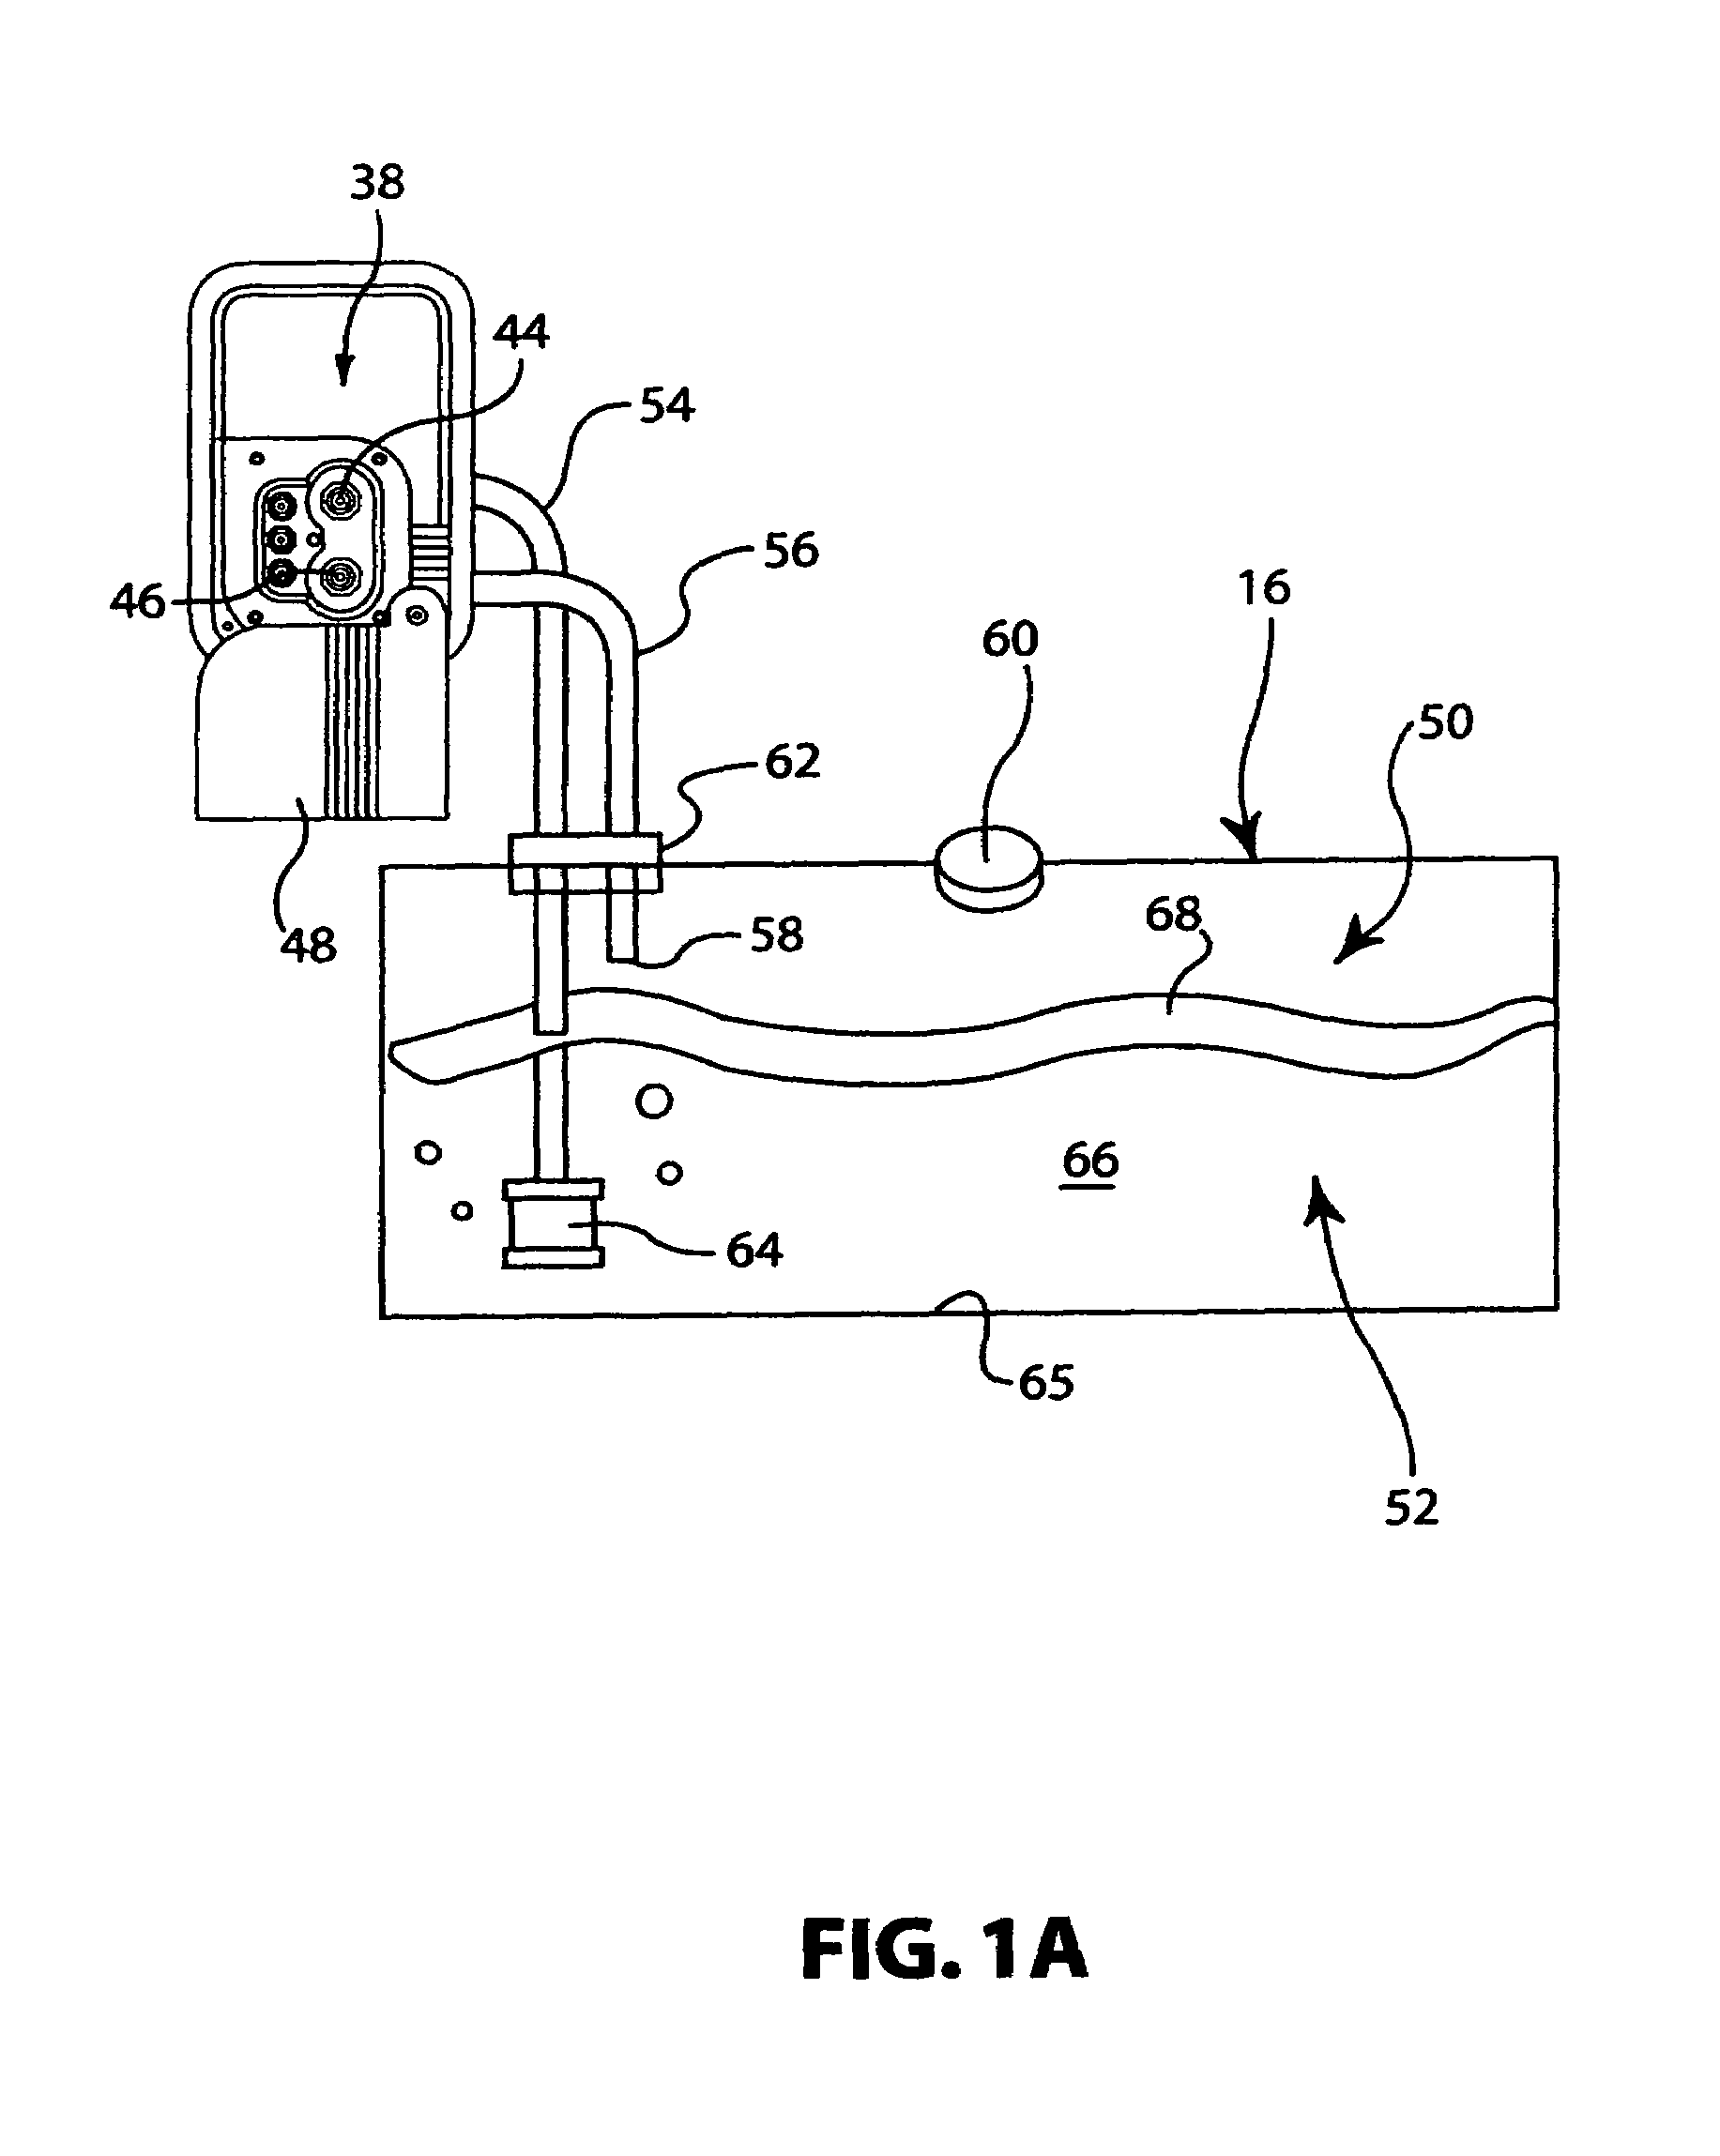 Total containment fluid delivery system